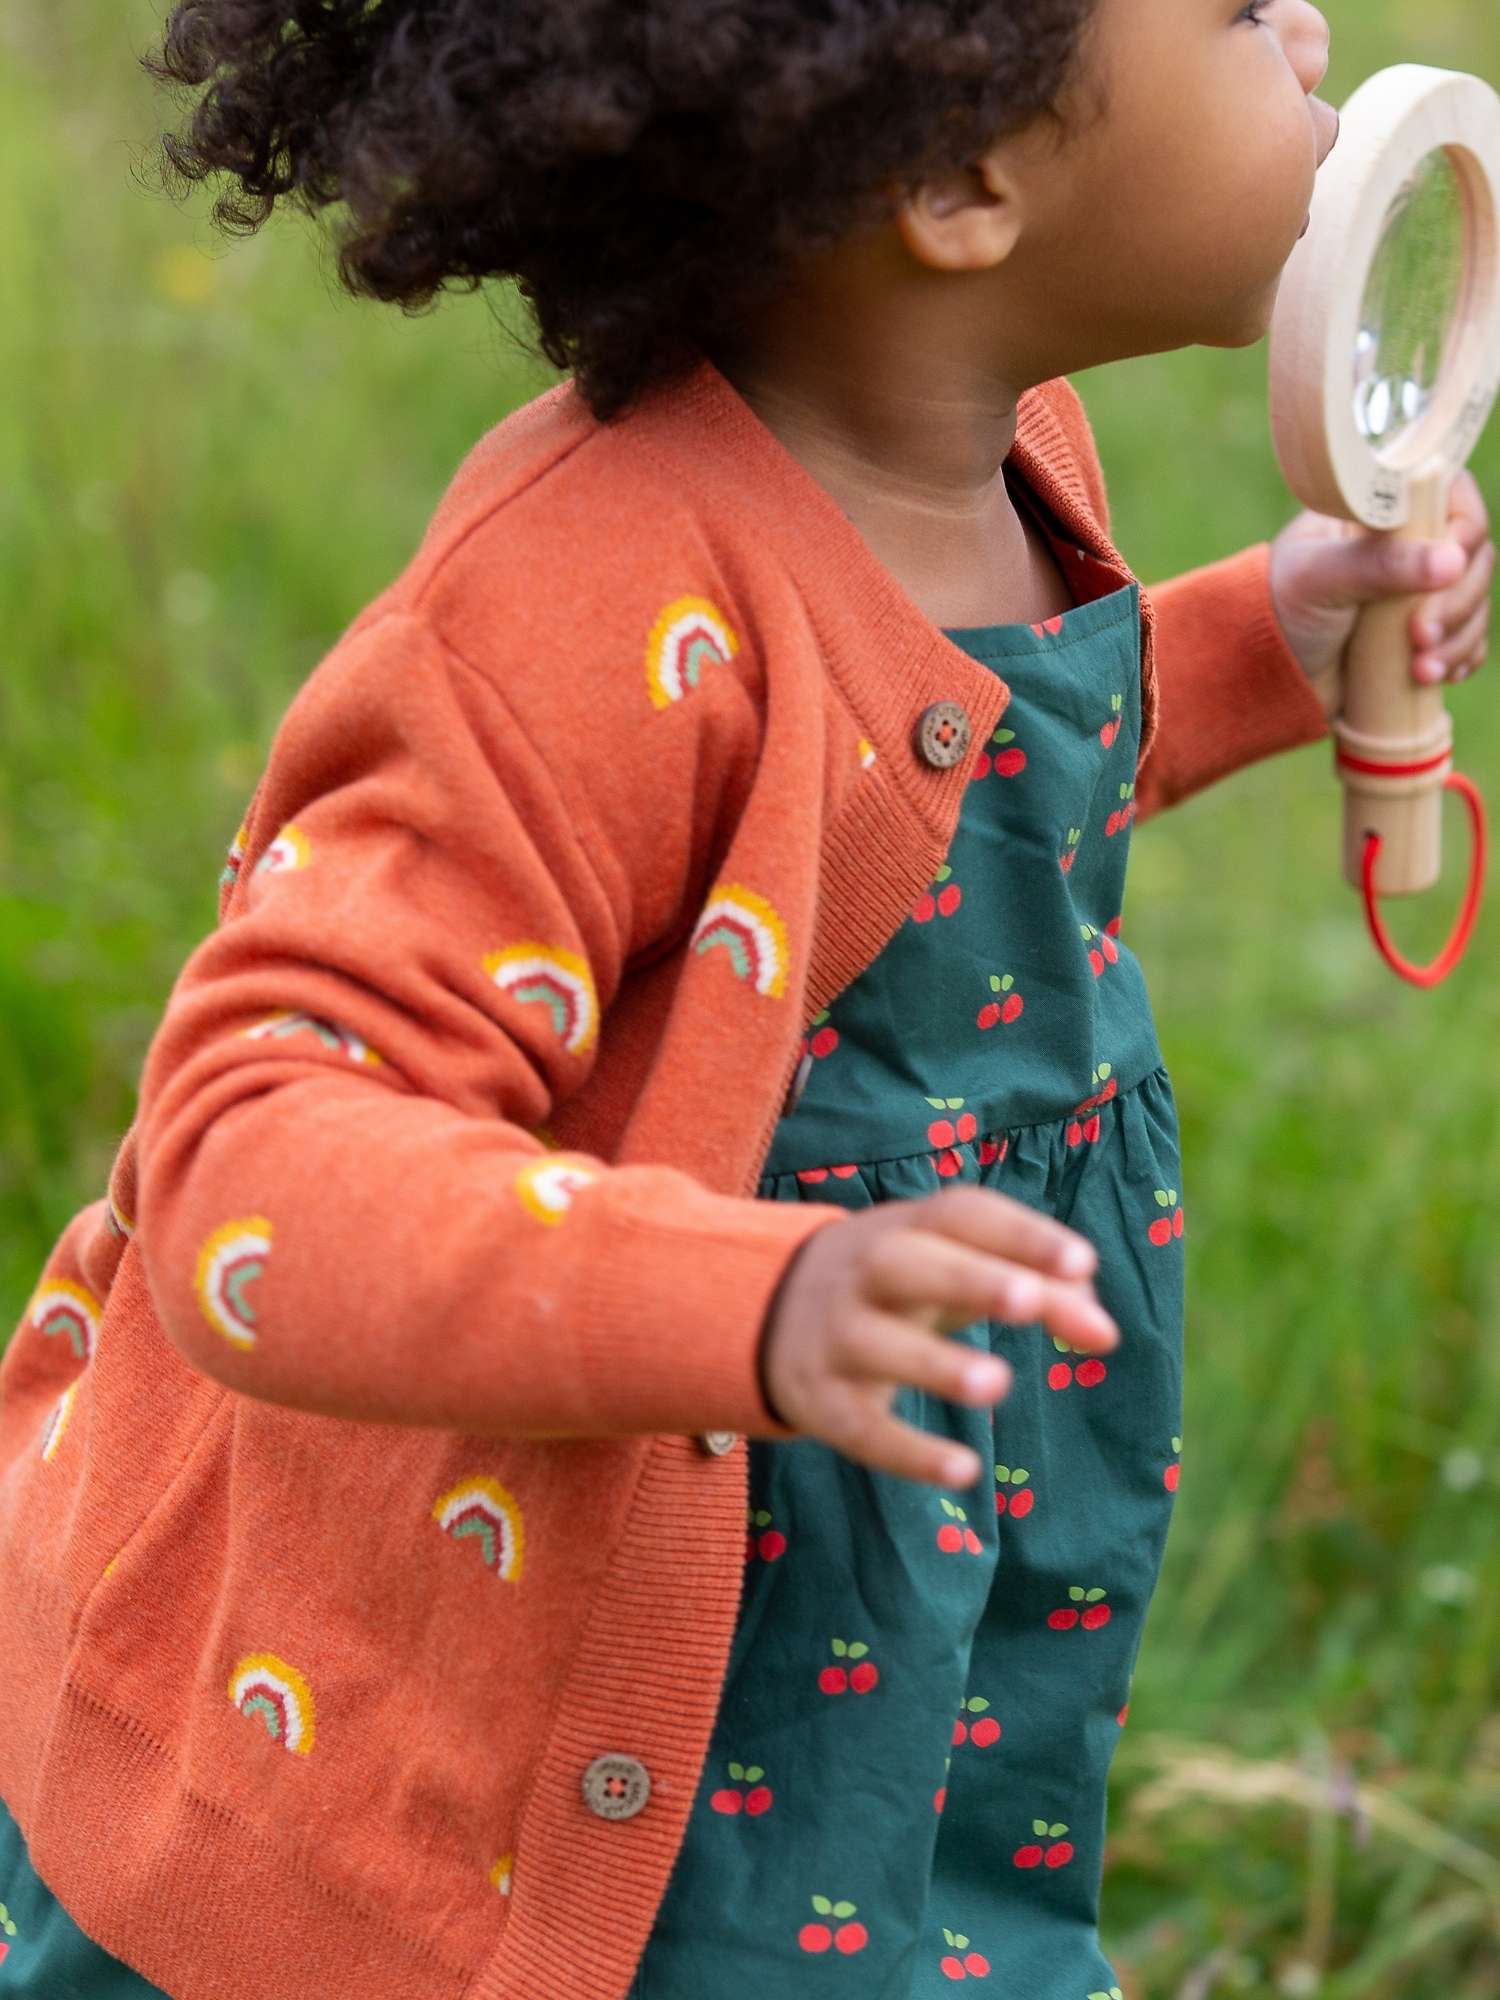 Buy Little Green Radicals Baby Organic Cotton From One To Another Rainbow Knit Cardigan, Walnut Online at johnlewis.com